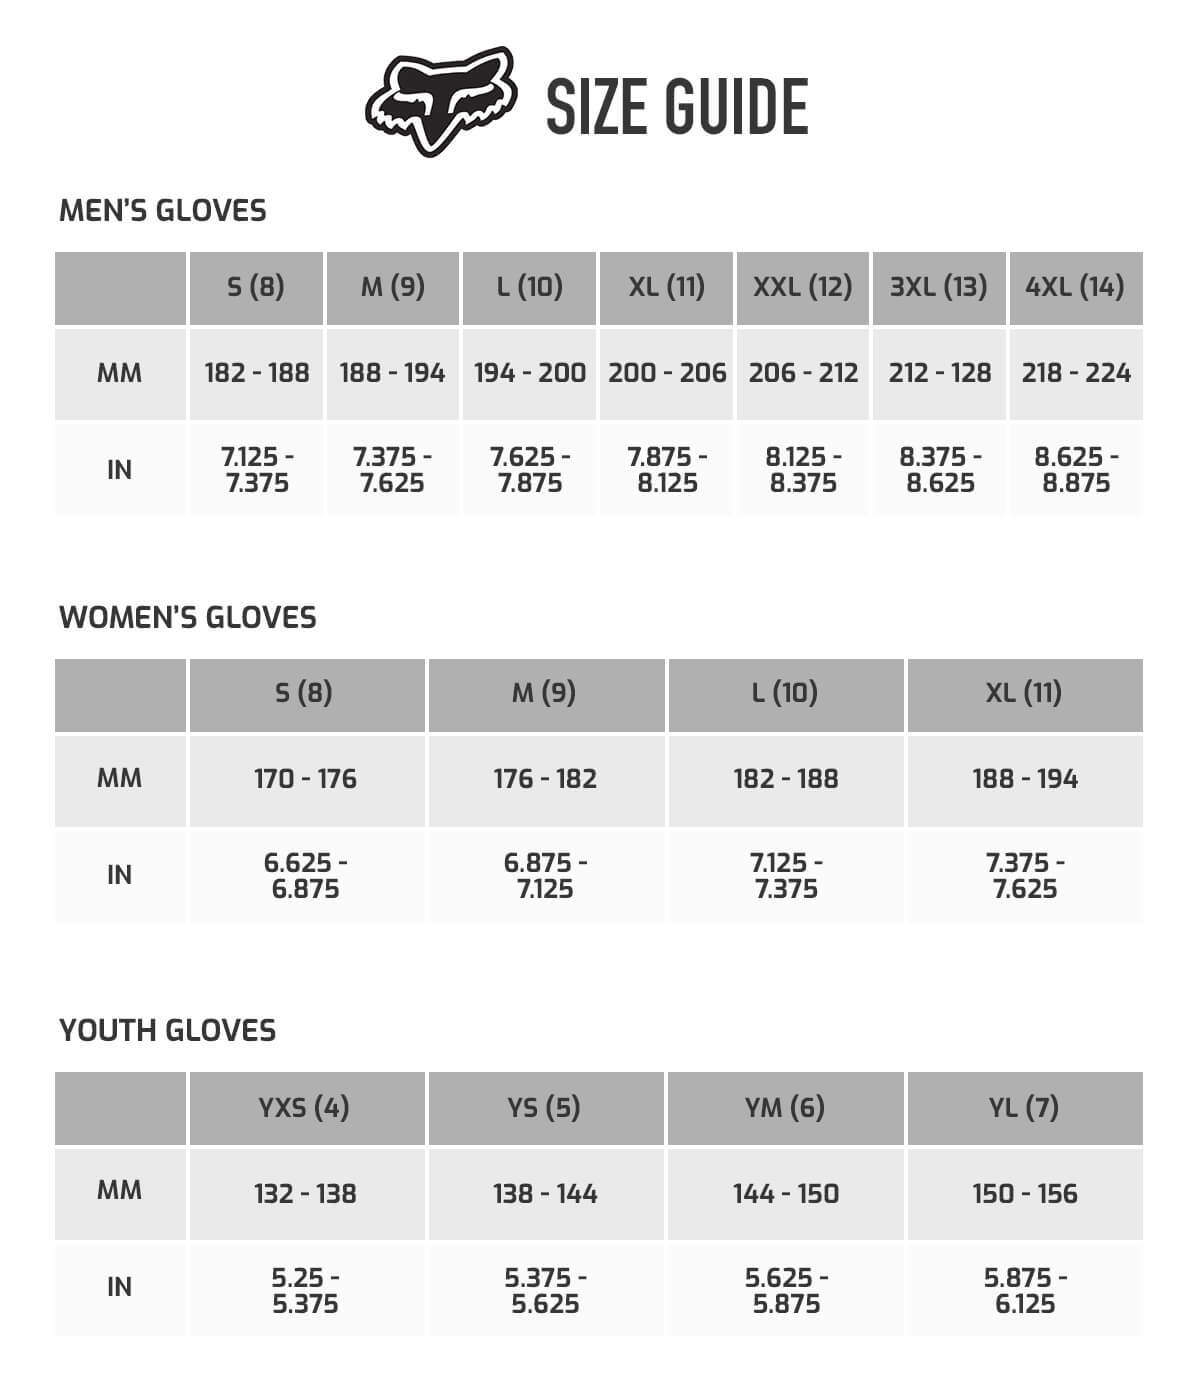 Fox Youth Size Chart